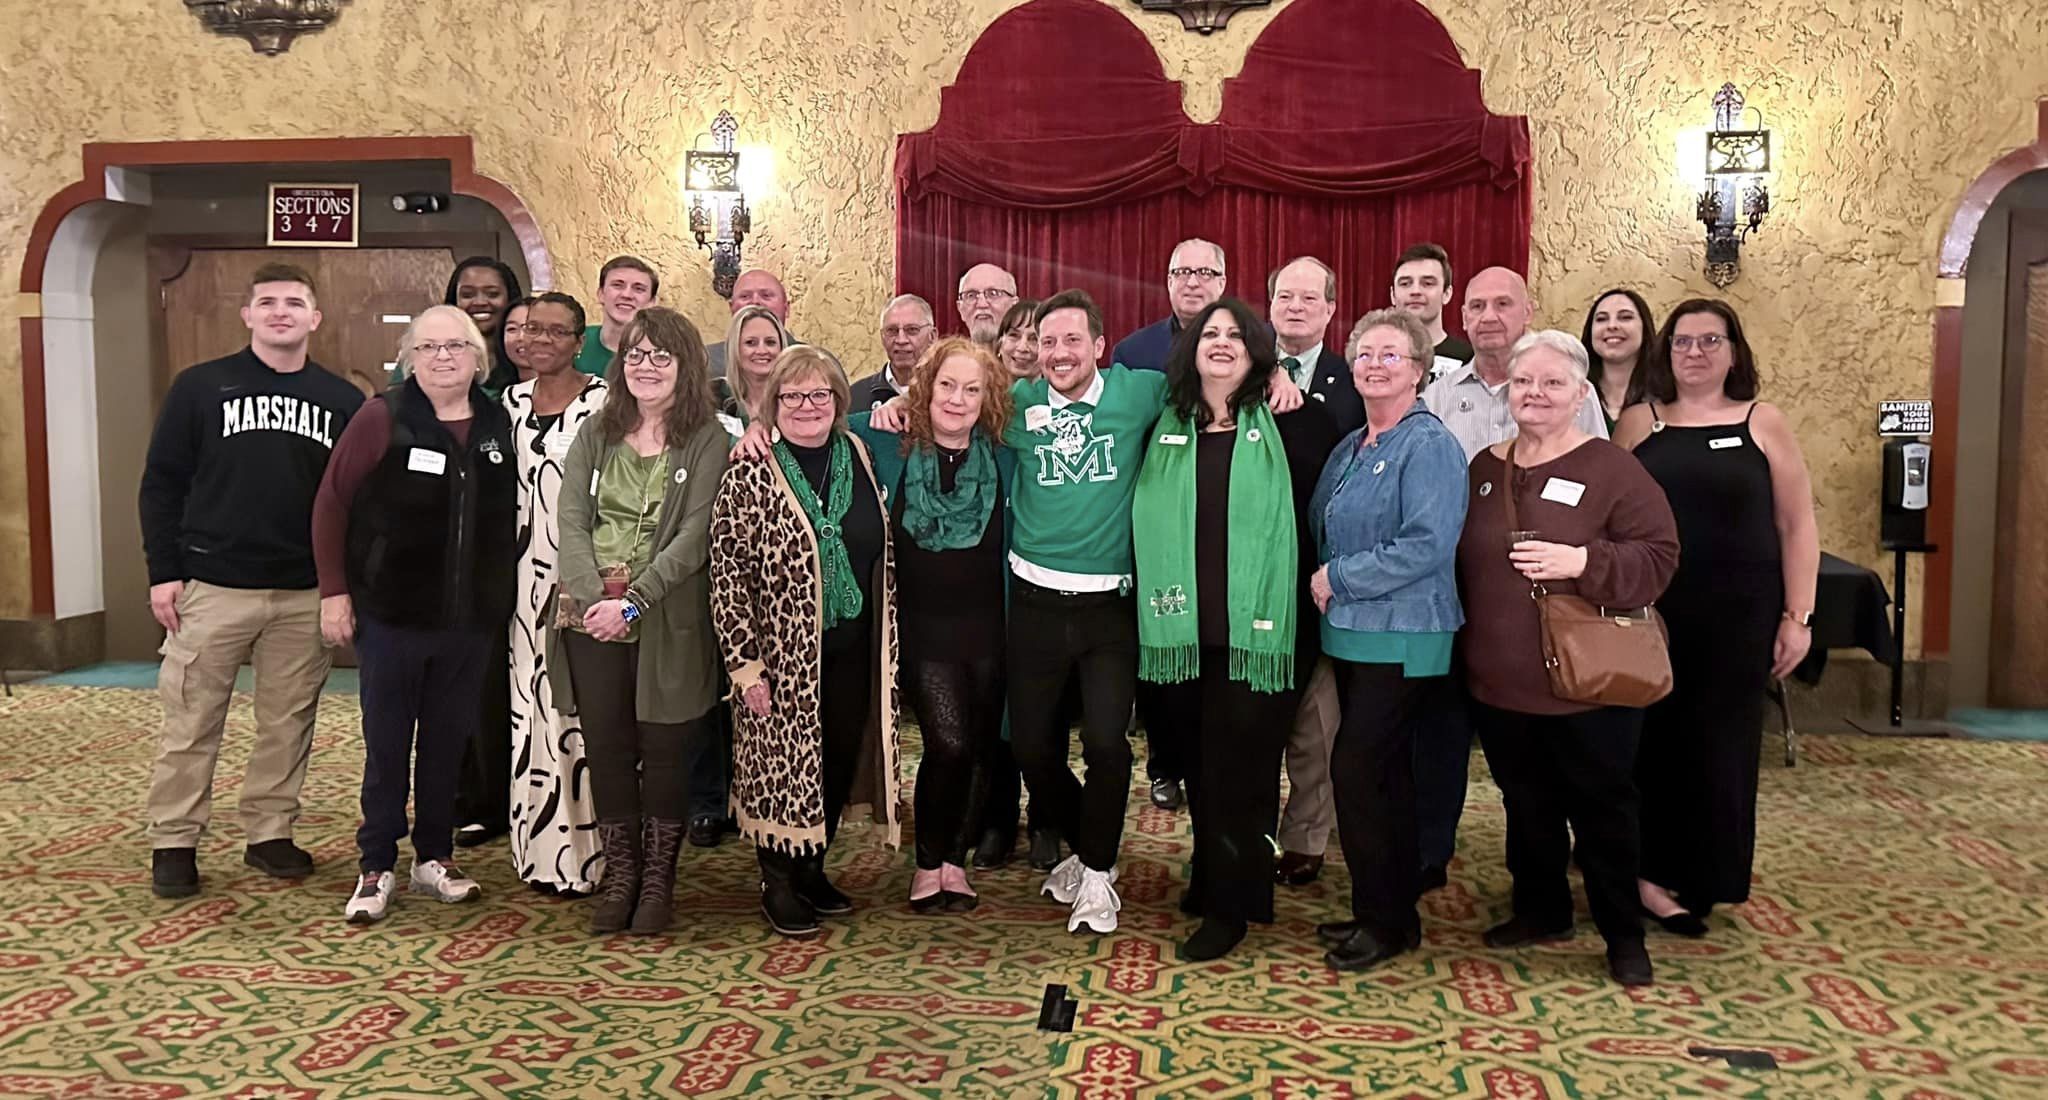 Marshall 75 Family Alumni Chapter Establishes Legacy Scholarship Fund to Honor Victims